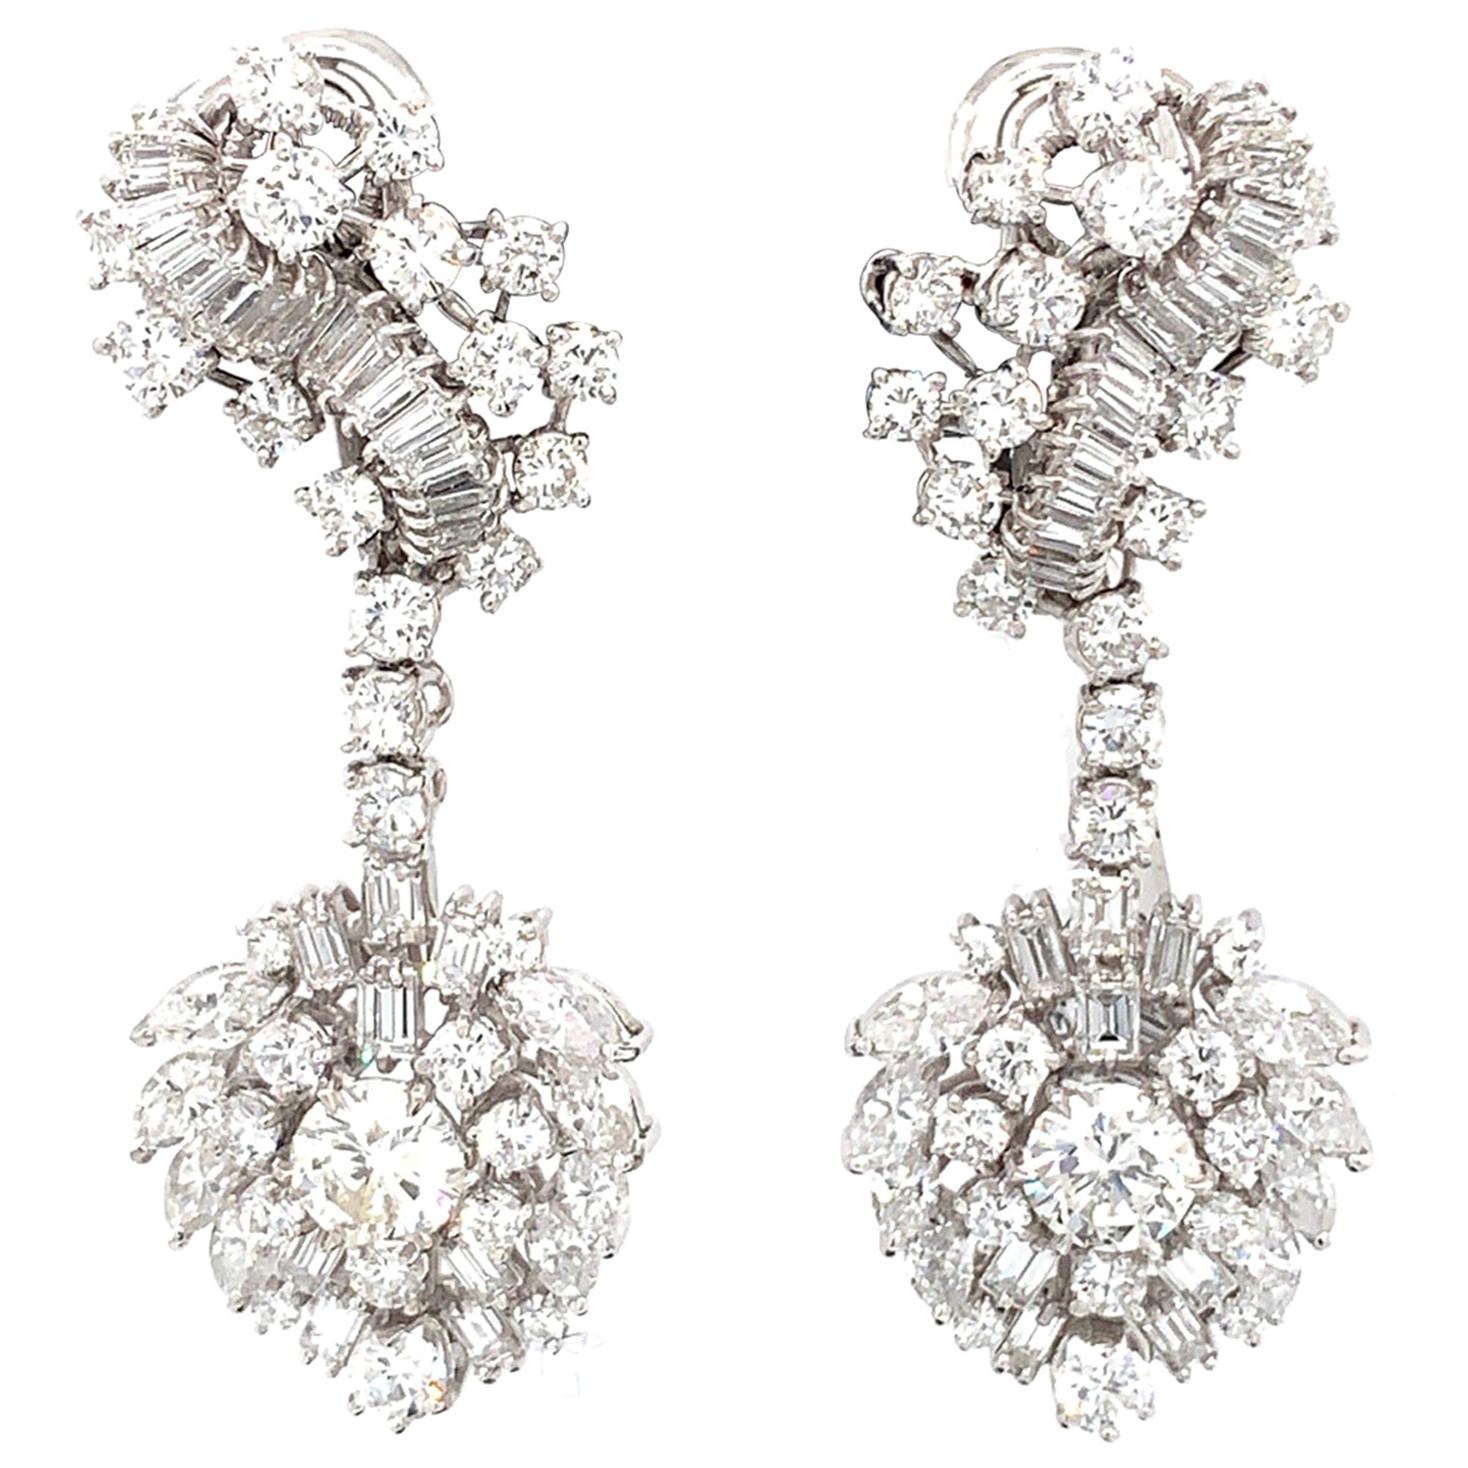 10 Carat Round and Fancy Shaped Diamond 18 Karat White Gold Cluster Earrings For Sale